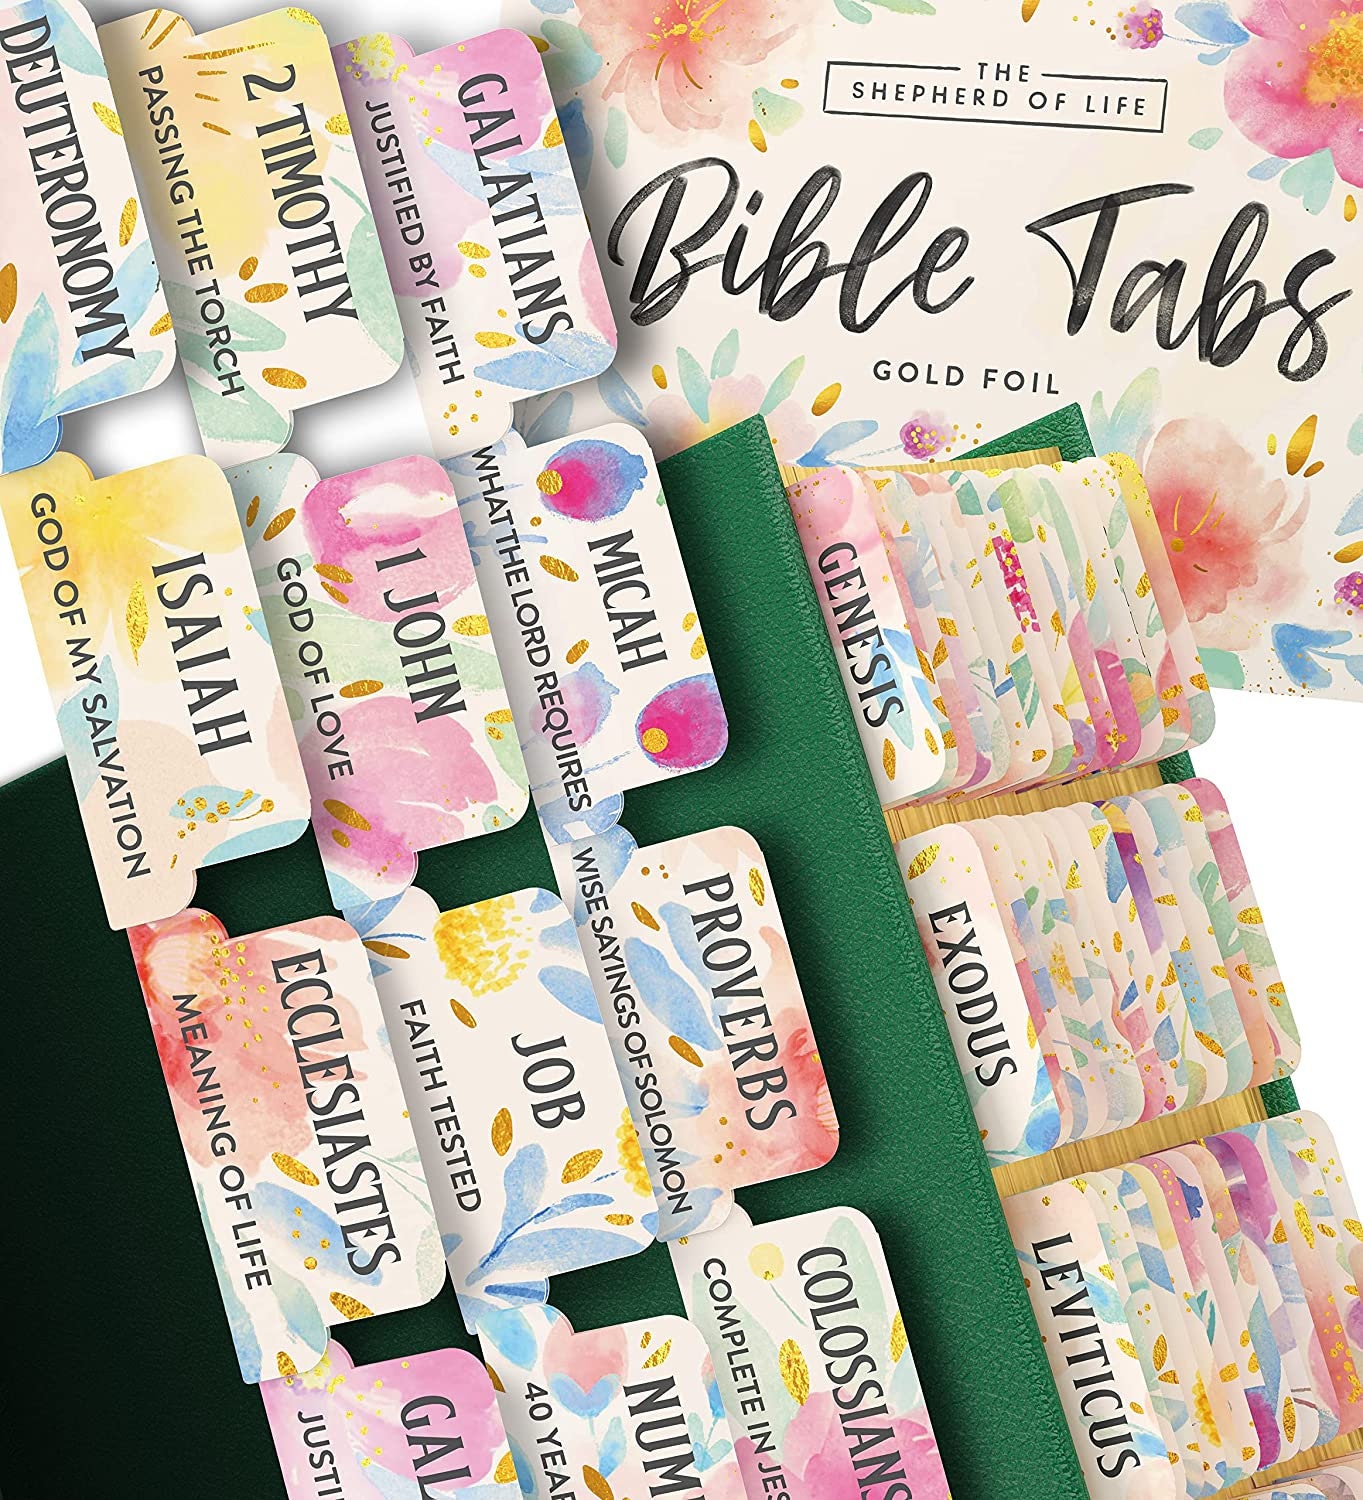  700 Pcs Transparent Sticky Notes, Cute Sticky Note Pads, Clear  Bible Tabs with Dual Tips Marker Pen, Aesthetic School Office Supplies for  Bible Study Note Taking Planner : Office Products